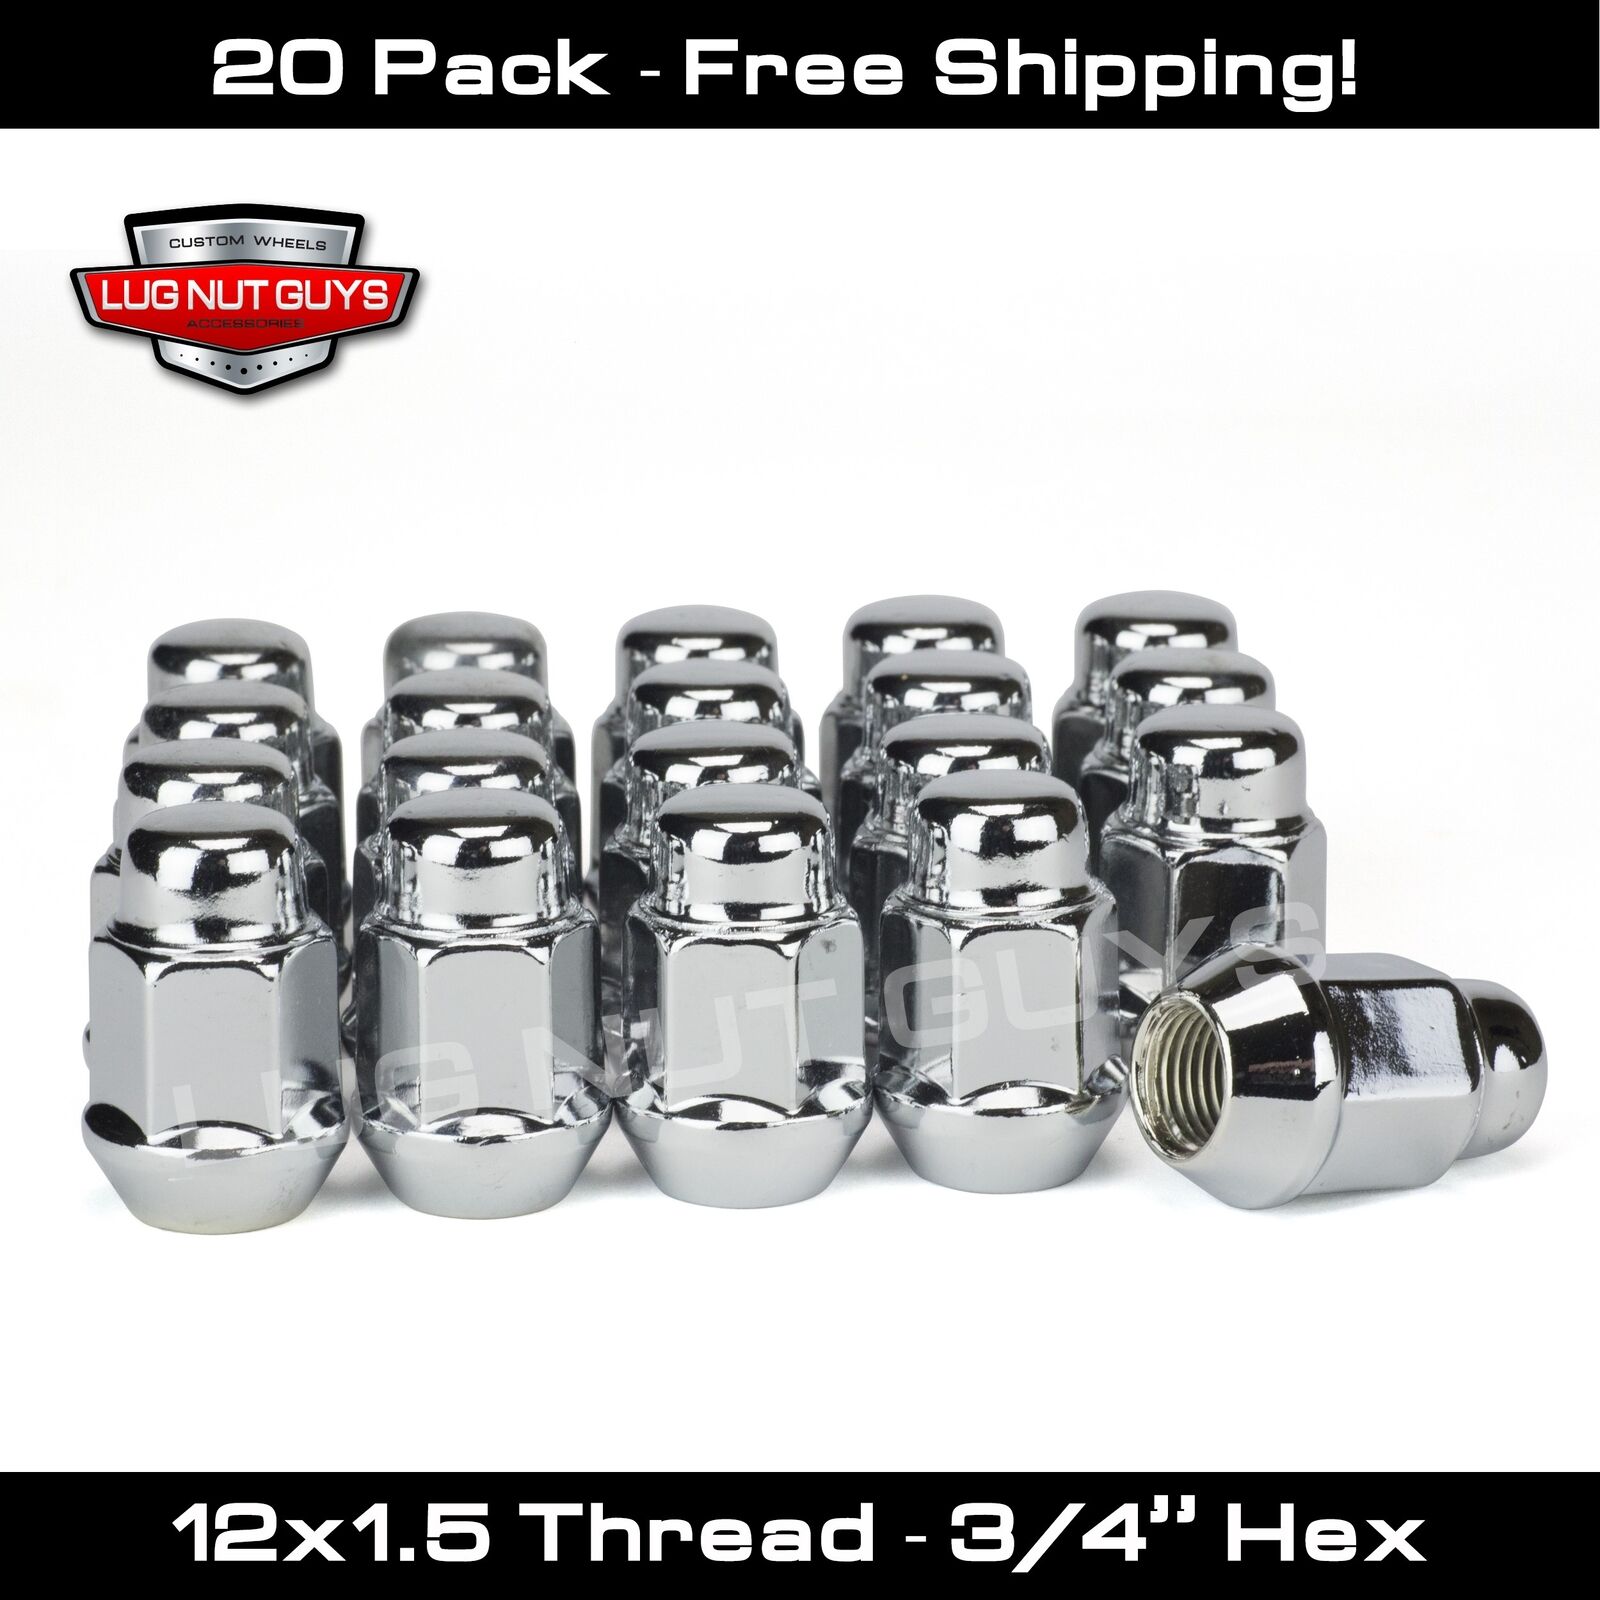 20 Lug Nuts Bulge Acorn Chrome fits Toyota With Aftermarket Wheels.